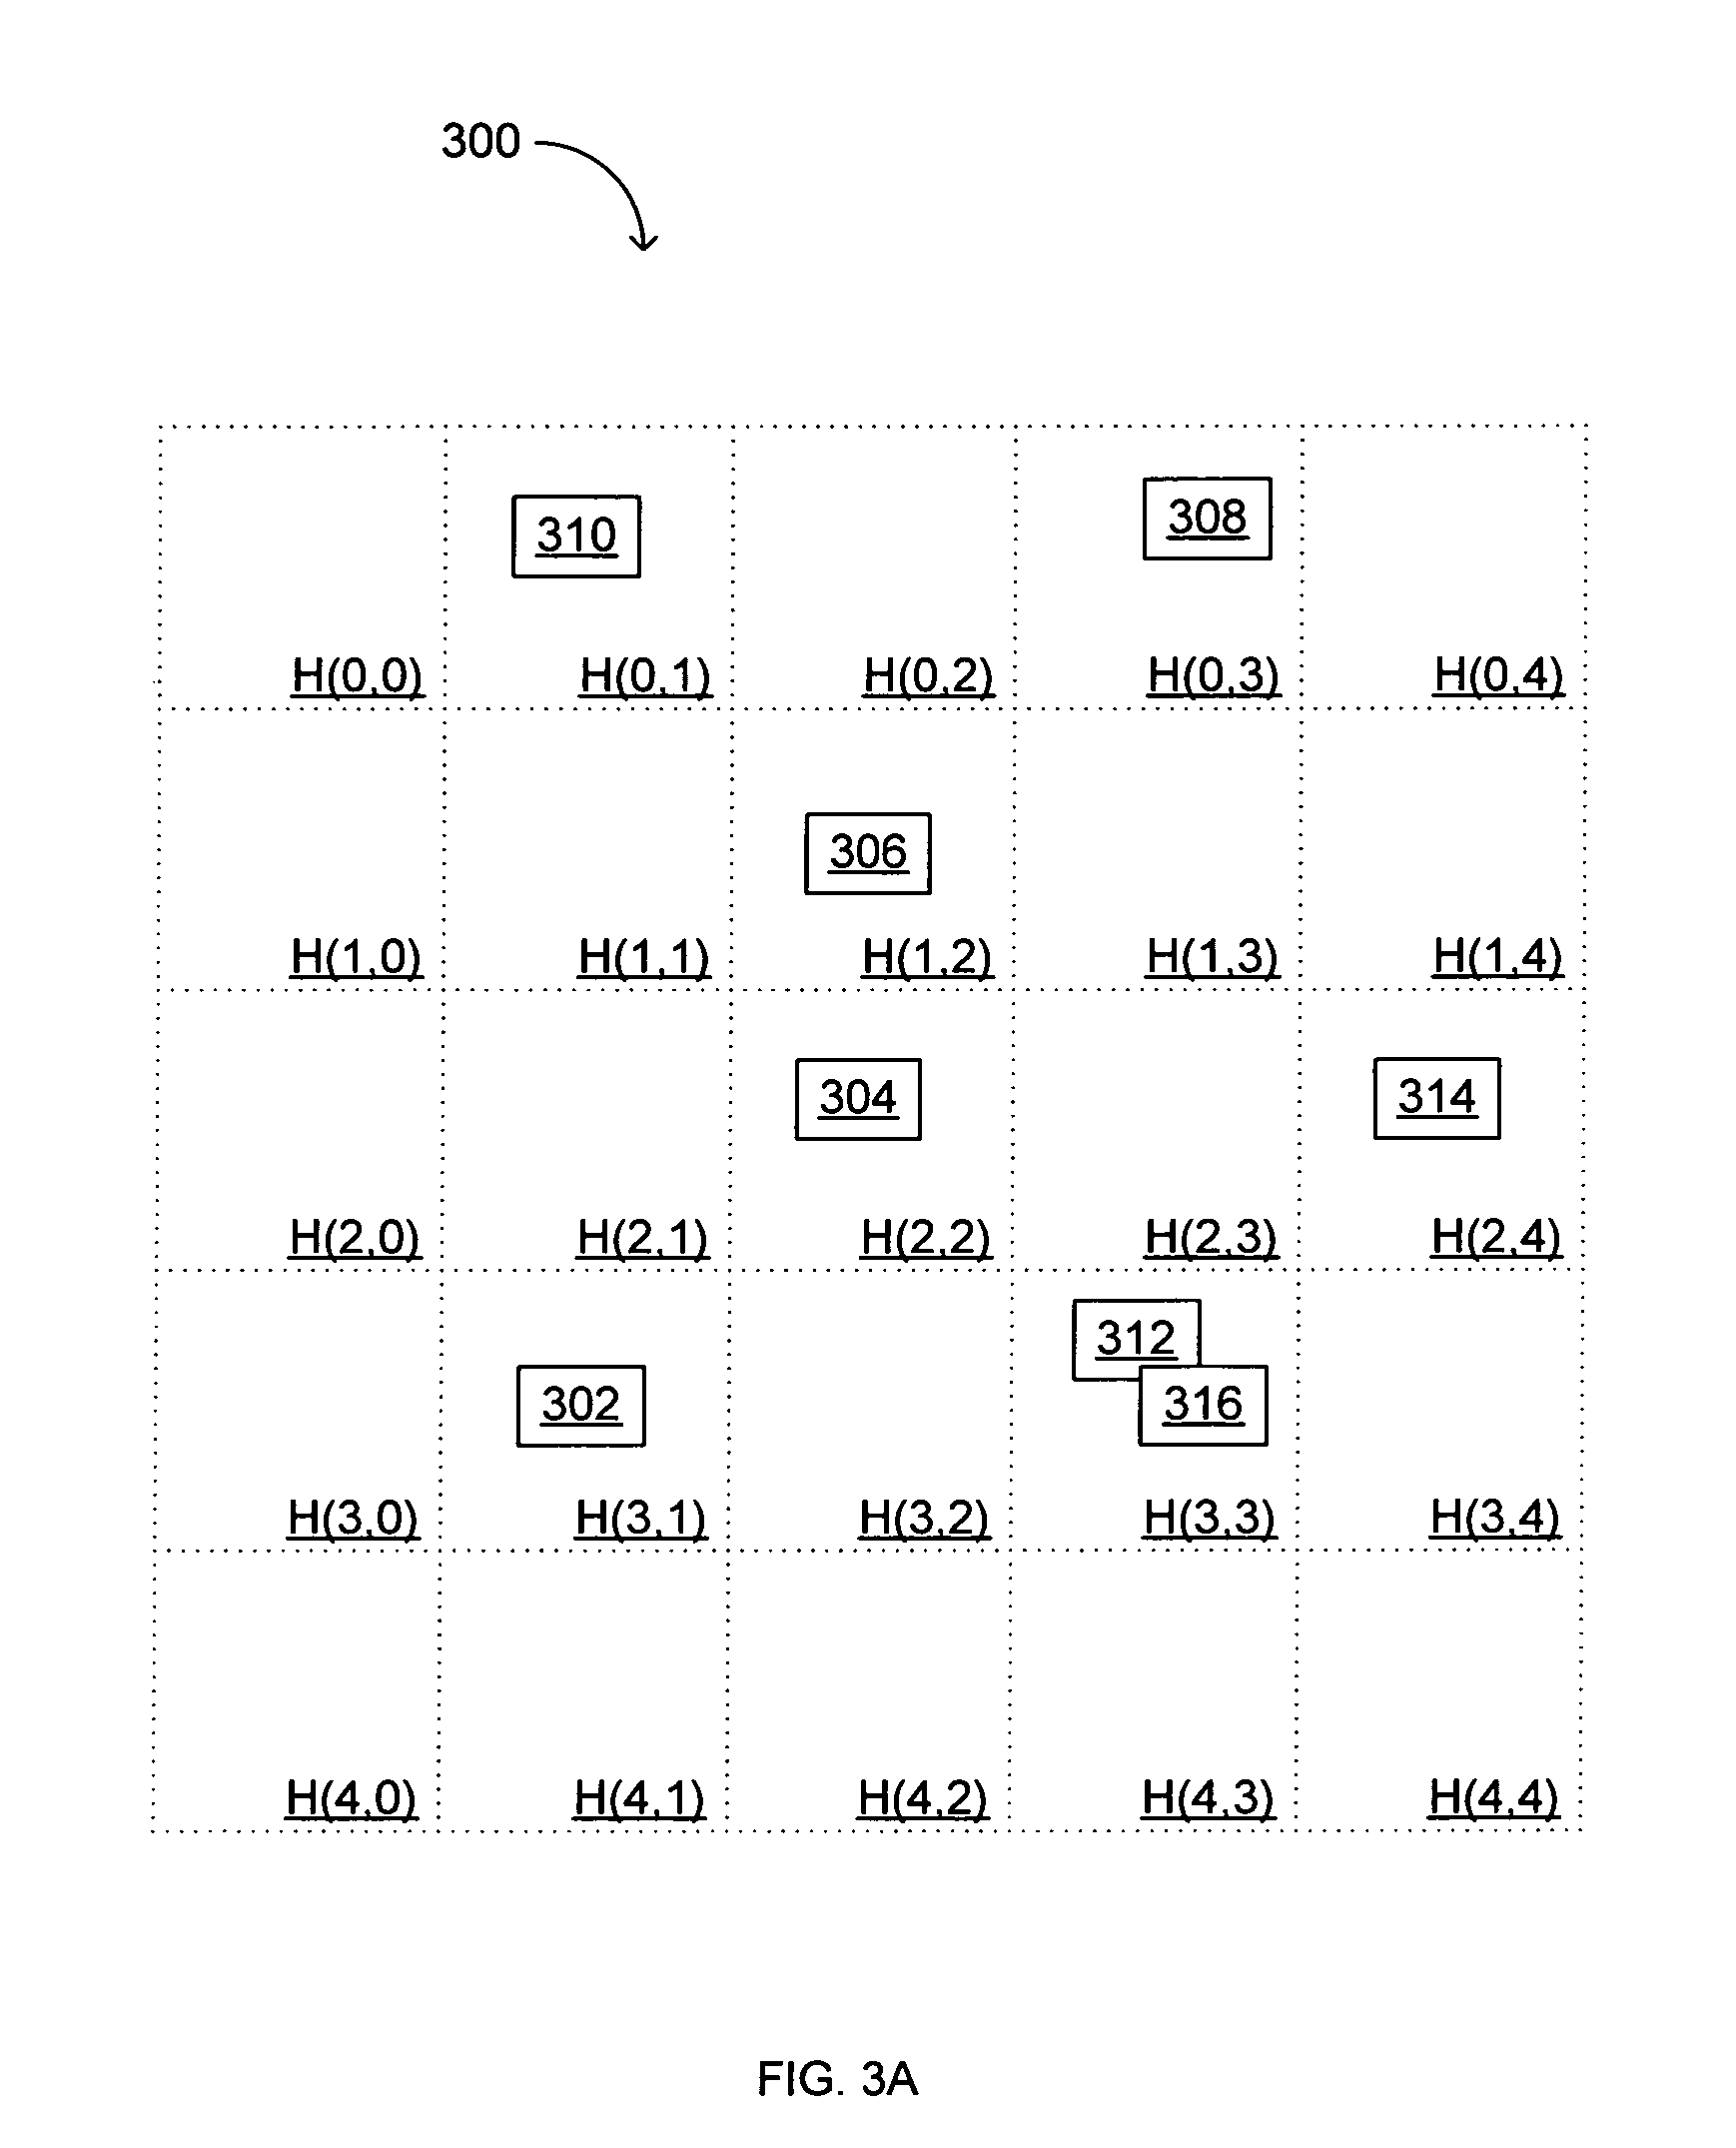 Method of placing and routing for power optimization and timing closure